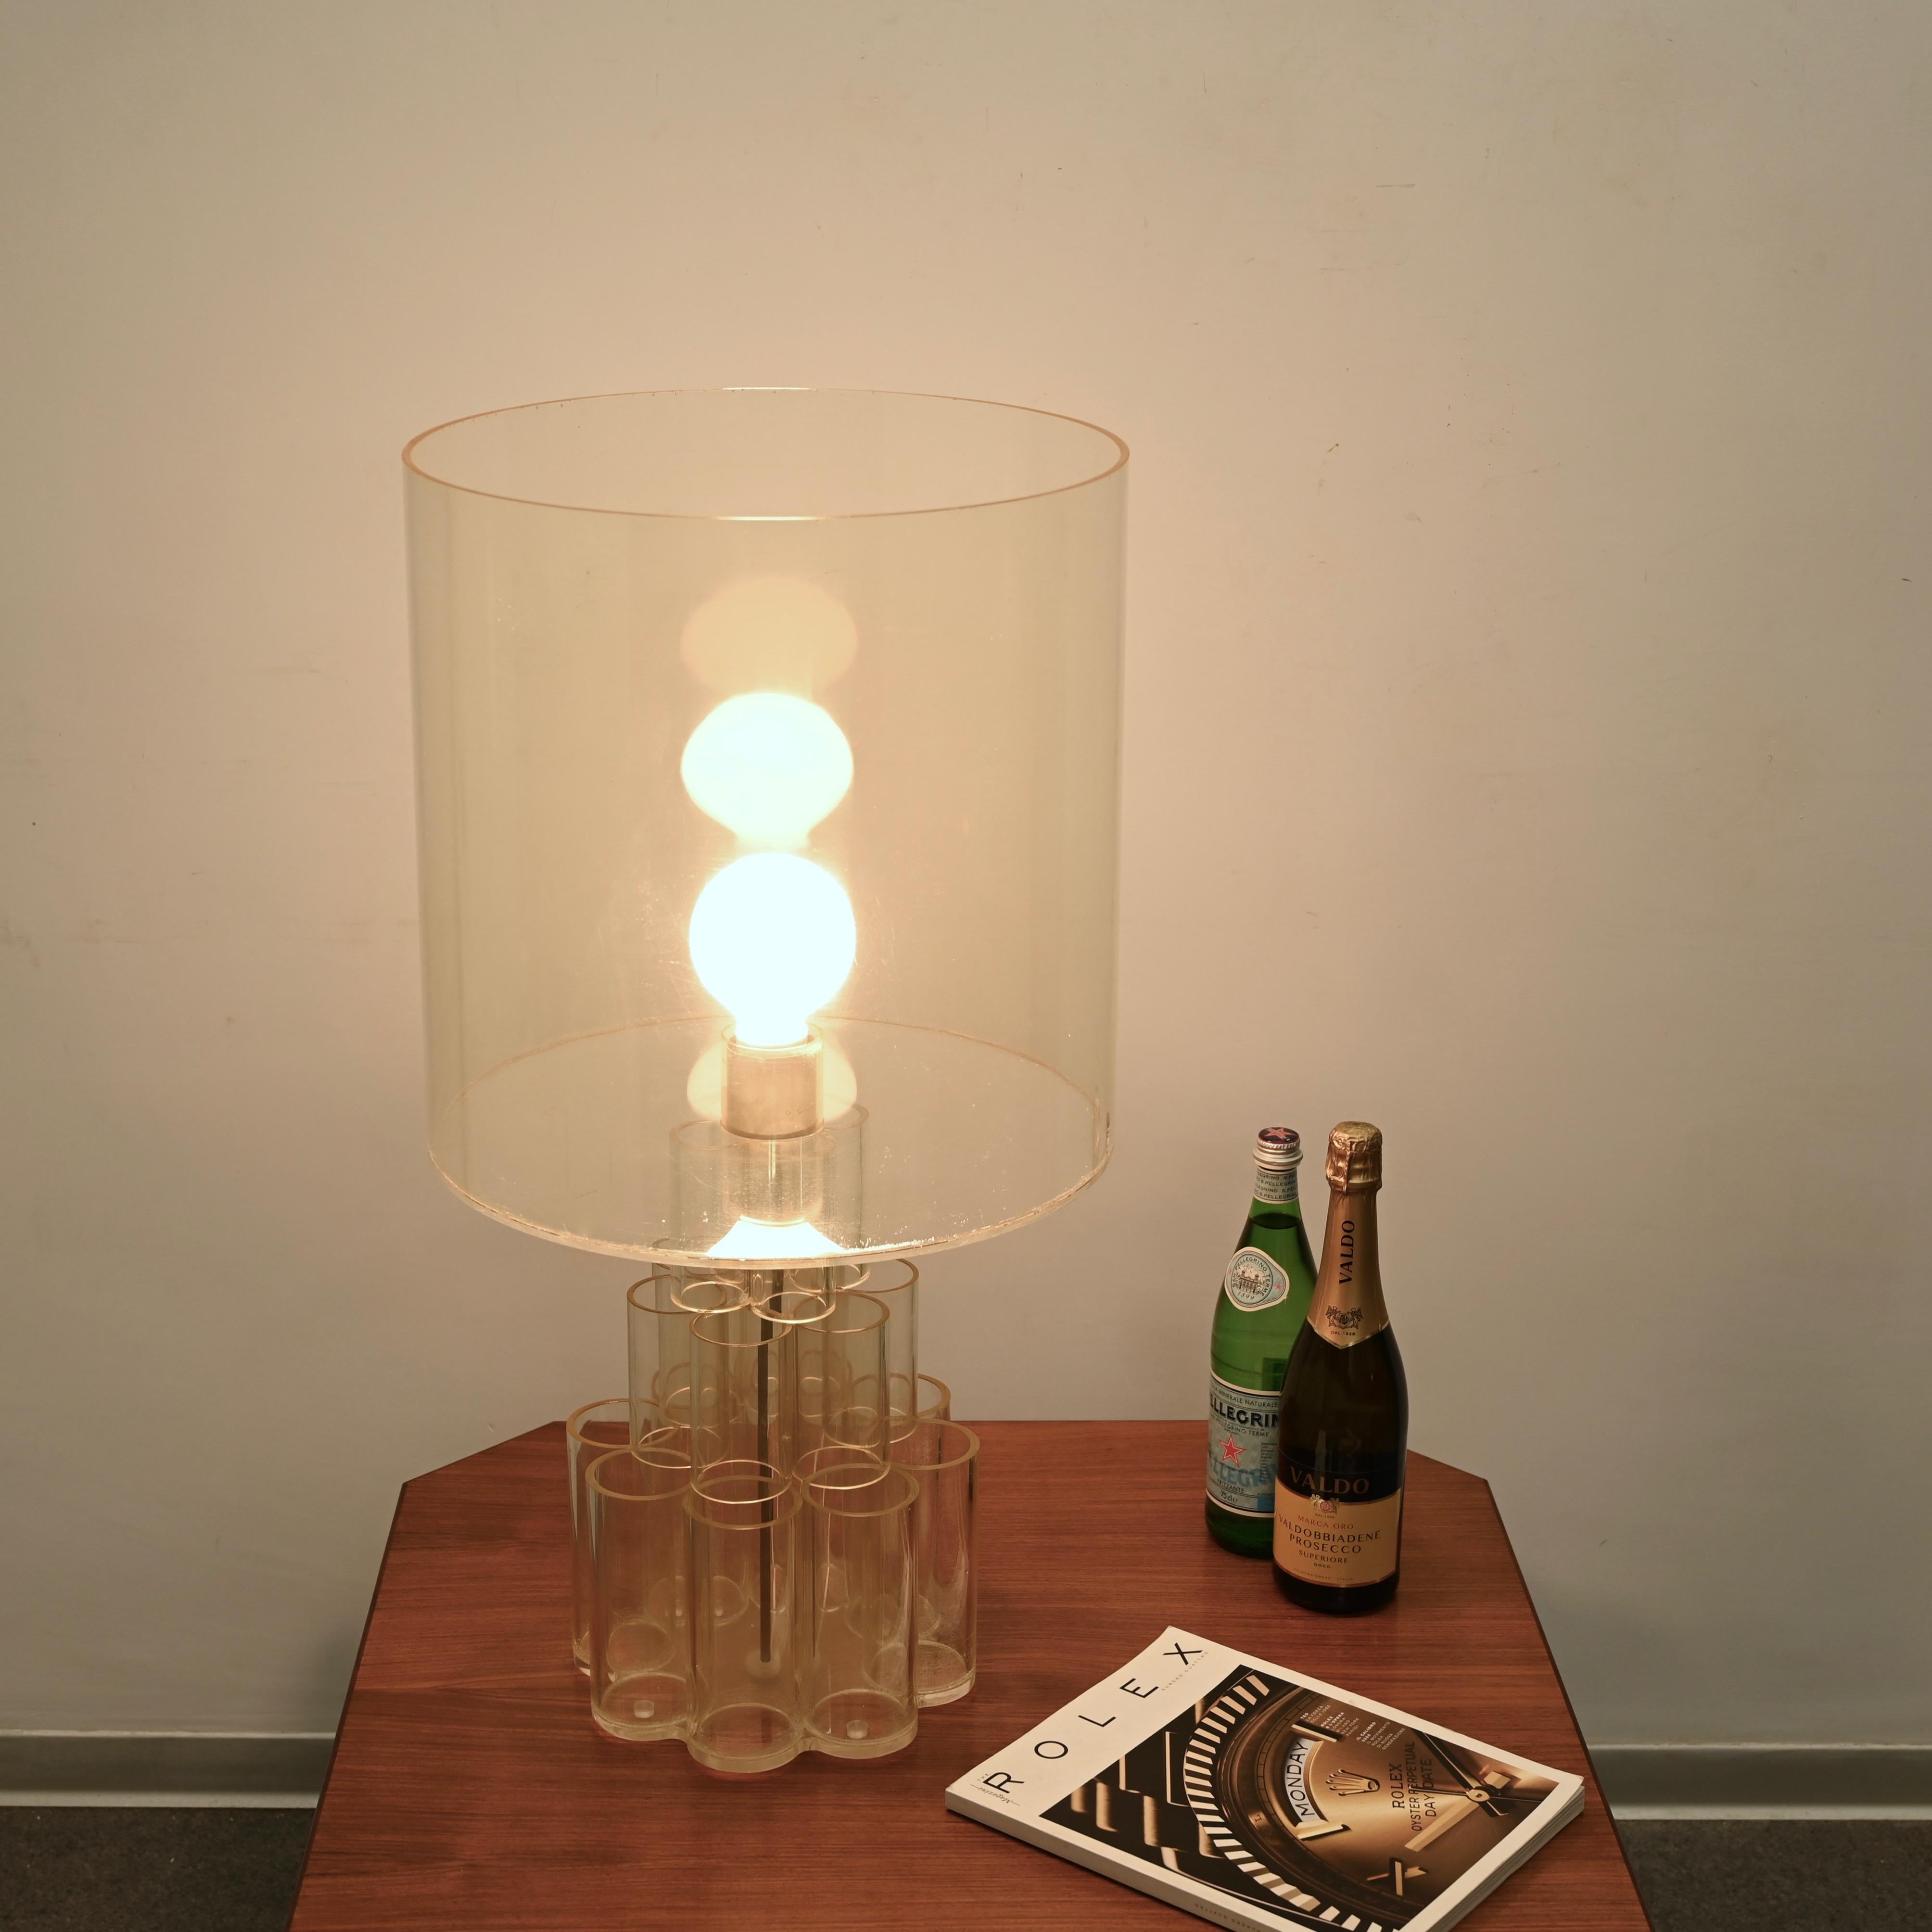 Mid-Century Modern Table Lamp in Lucite Plexiglass, Panton Style, Italy, 1970s For Sale 9